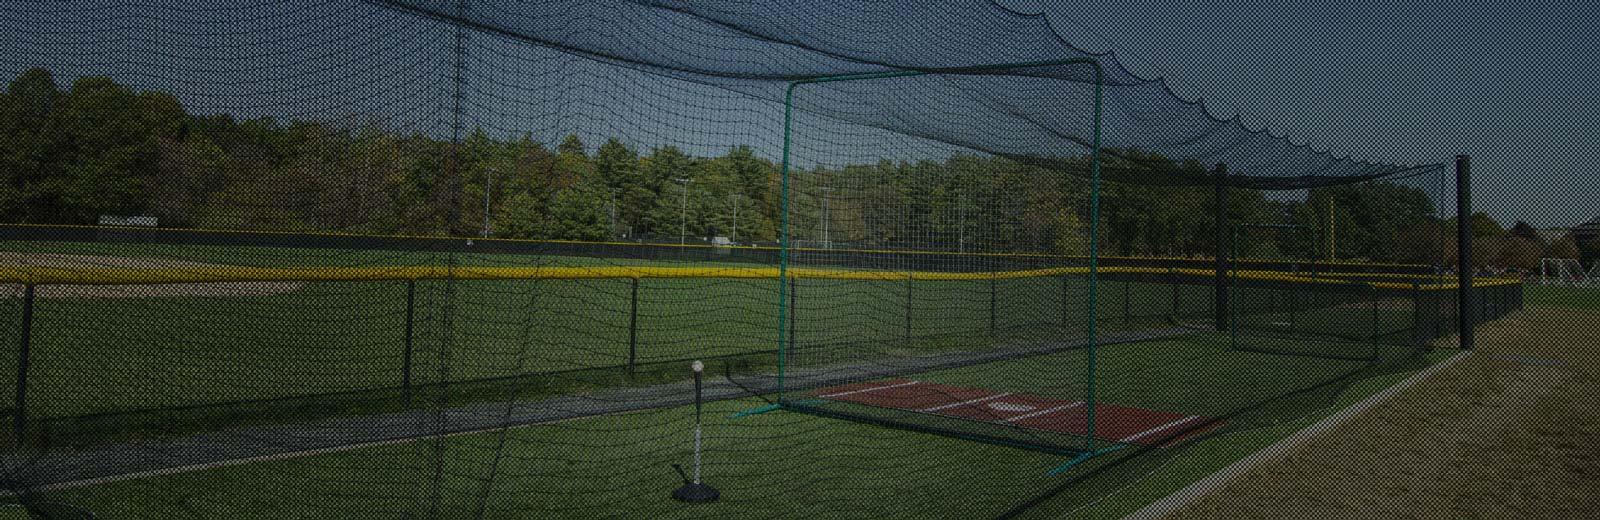 Outdoor Batting Cages for Sale 